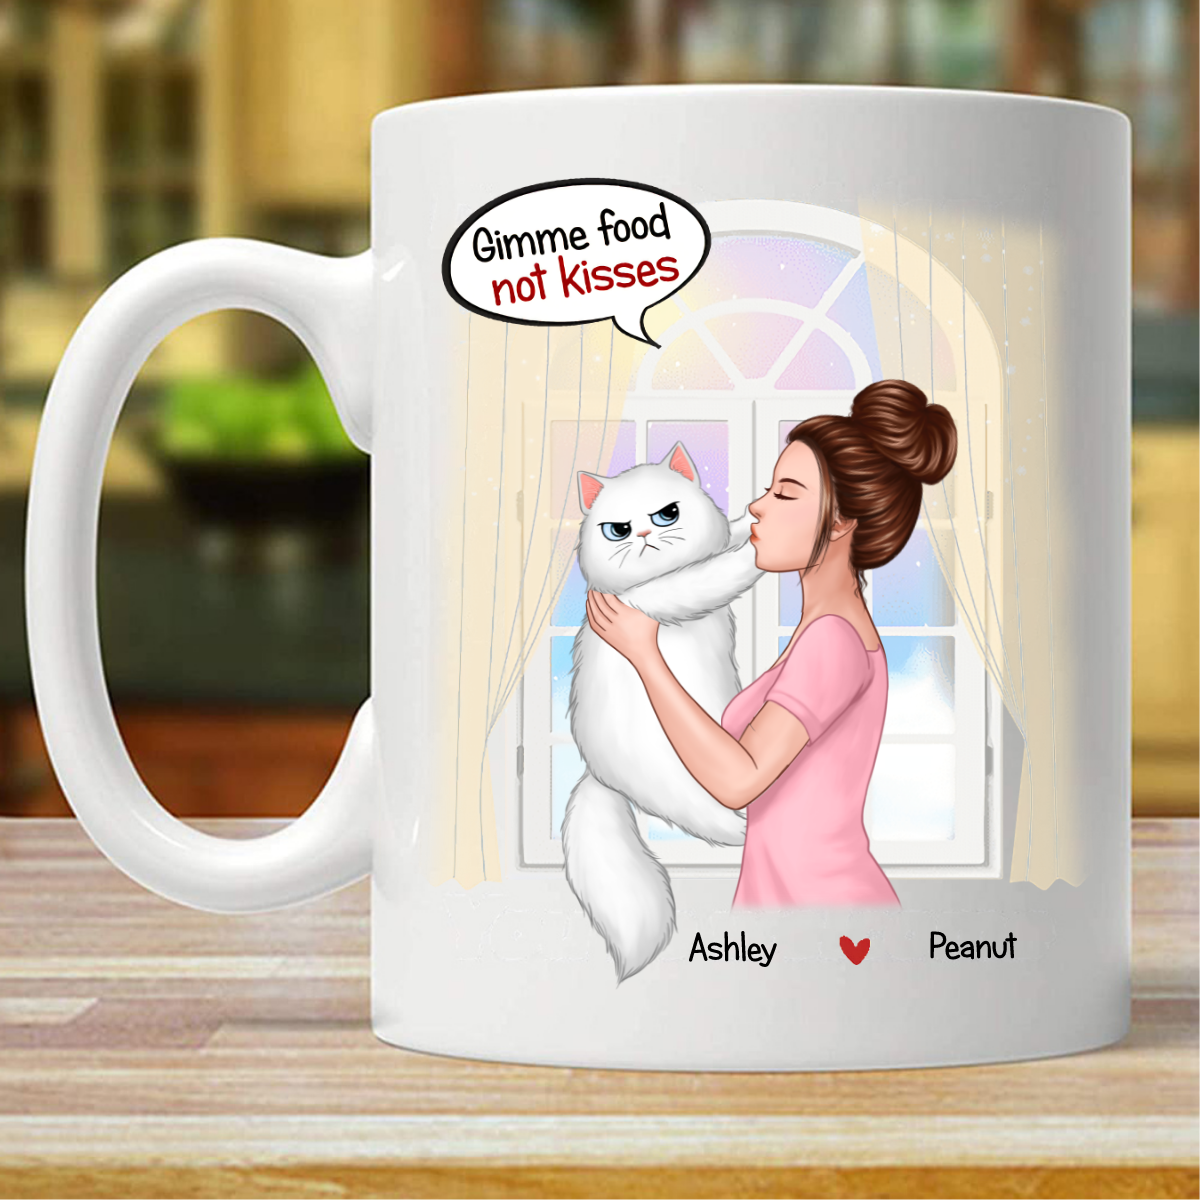 Gimme Me Food Not Kisses Girl & Cat Personalized Mug (Double-sided Printing)